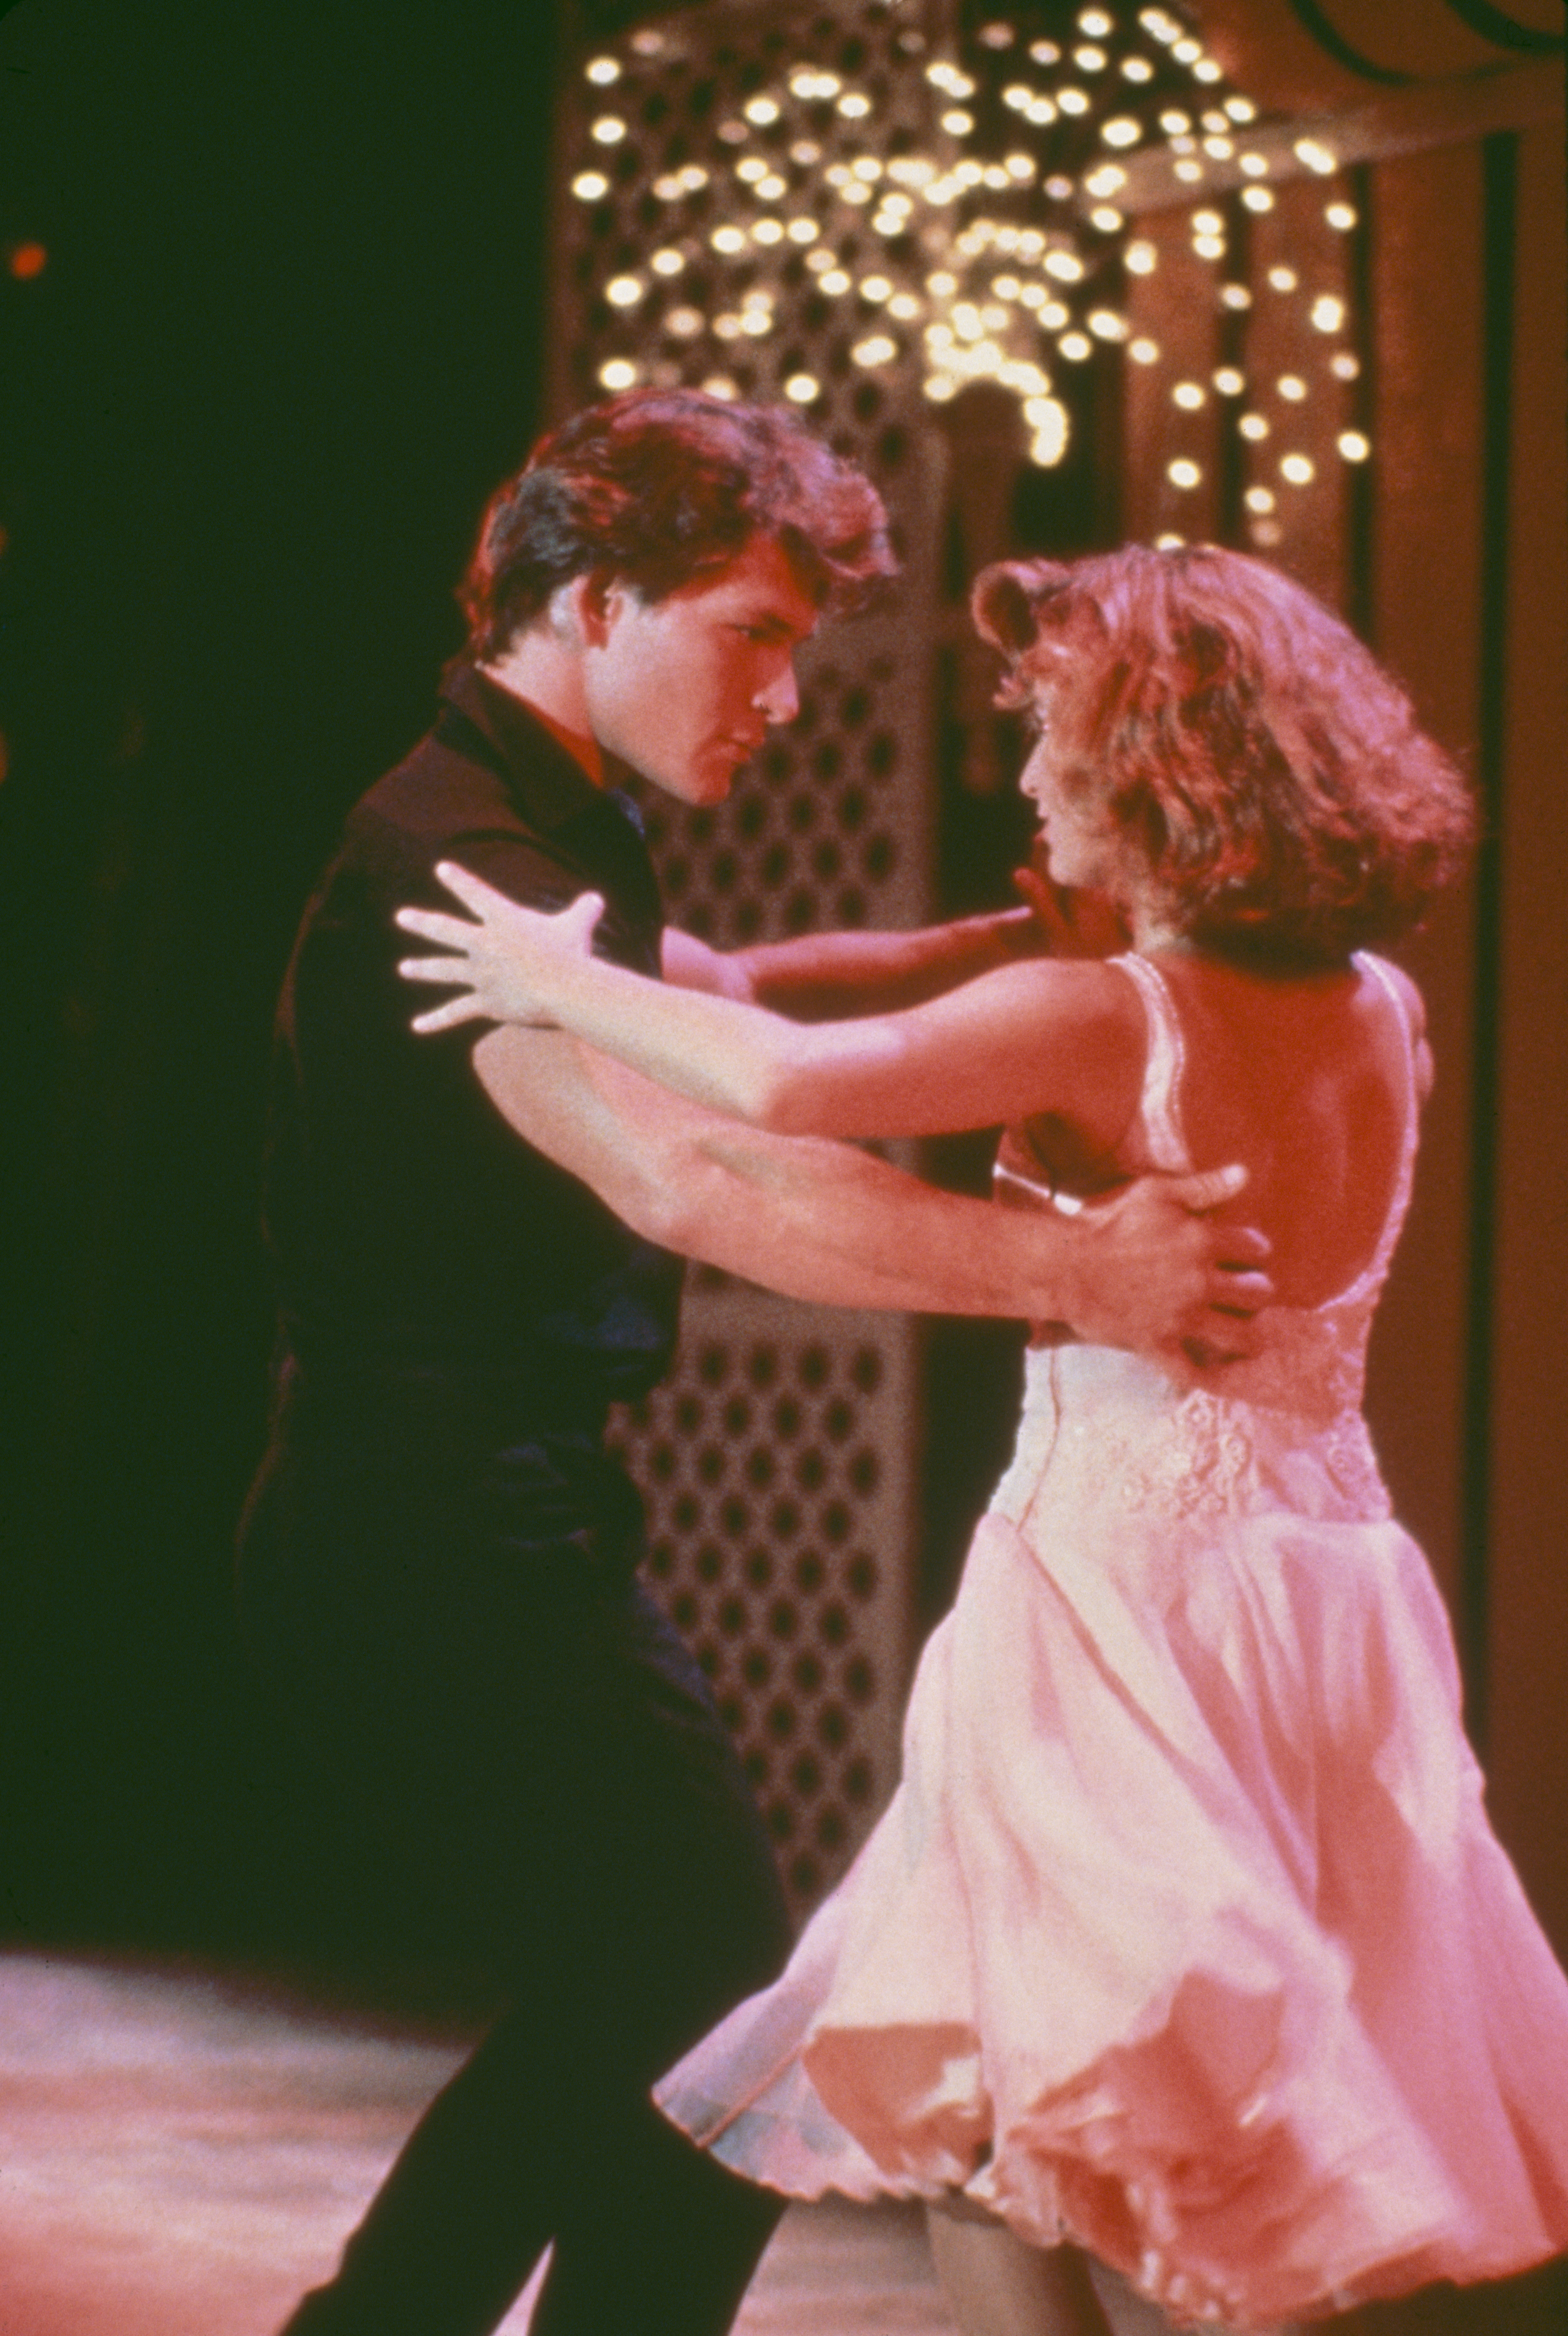 Patrick Swayze and Jennifer Grey in the film "Dirty Dancing" in 1987 | Source: Getty Images